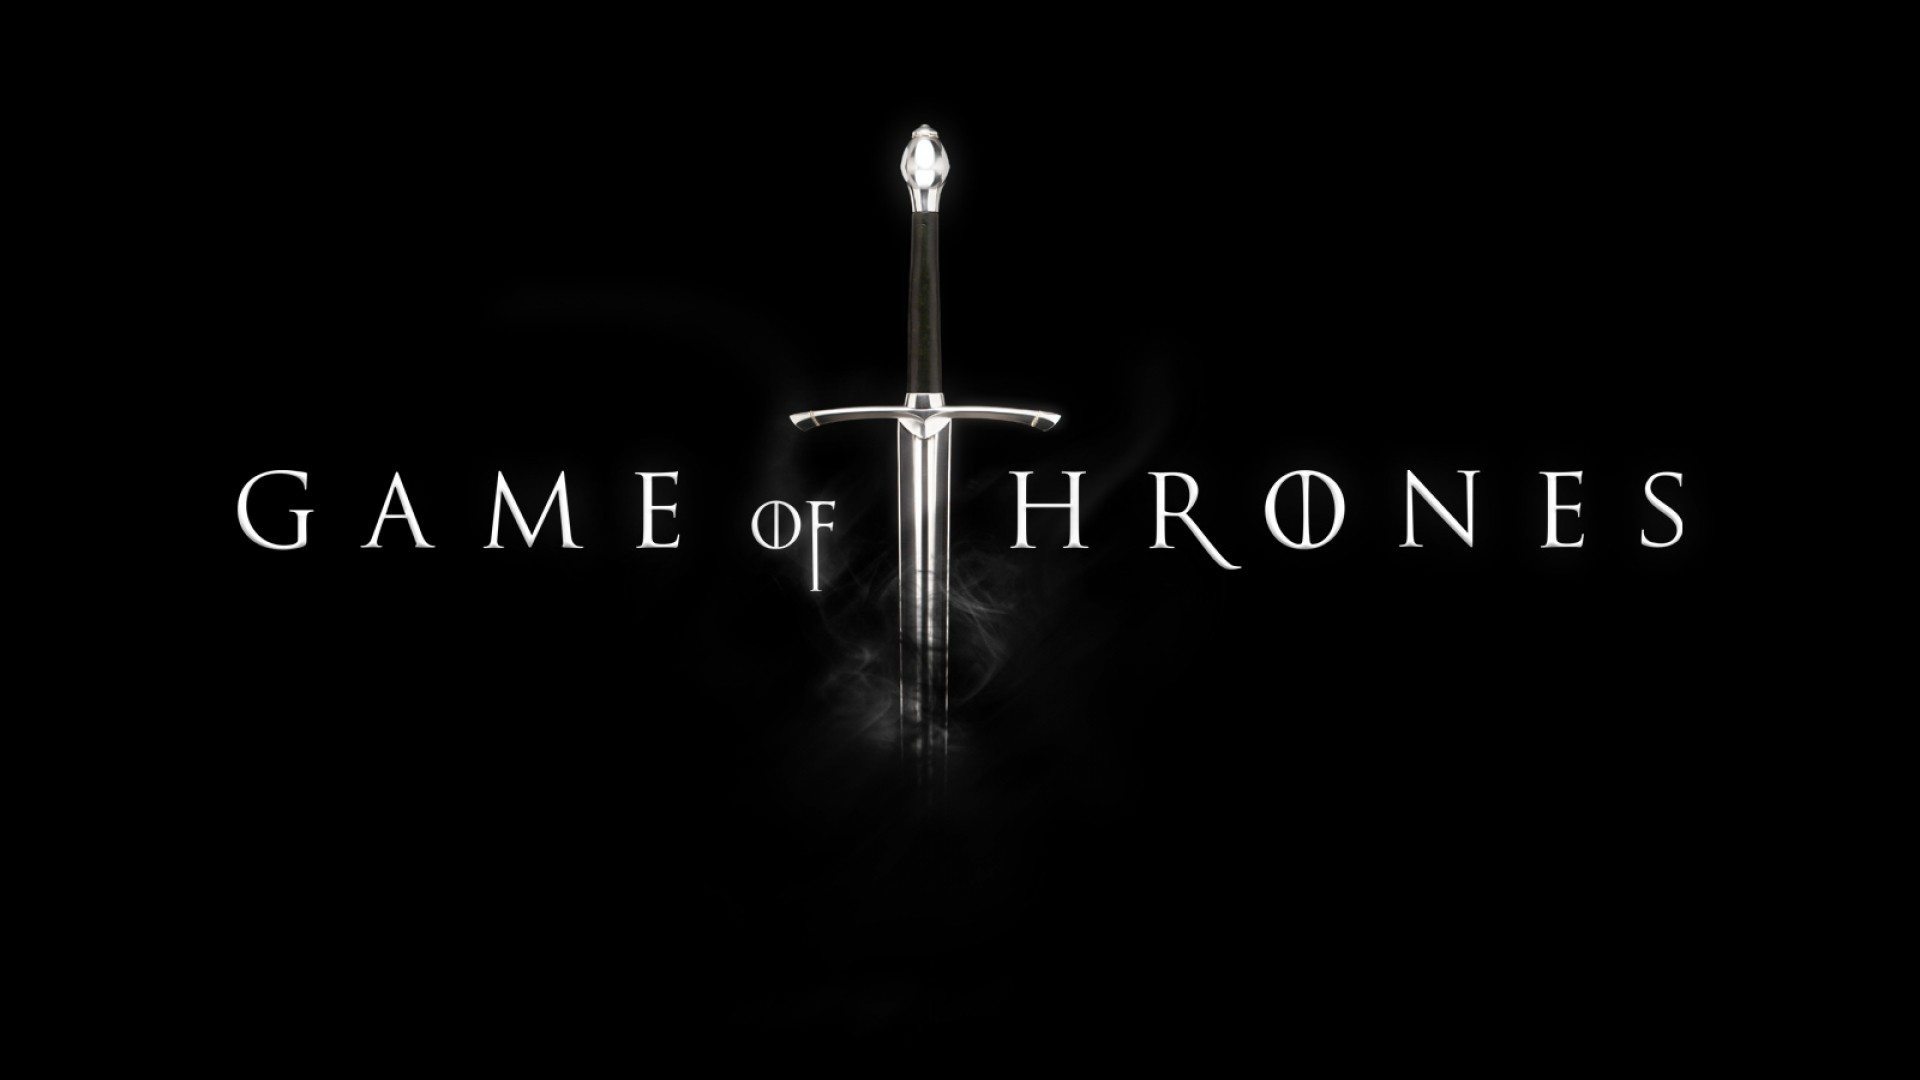 Download - Game of Thrones v1.08 - Eu Sou Android